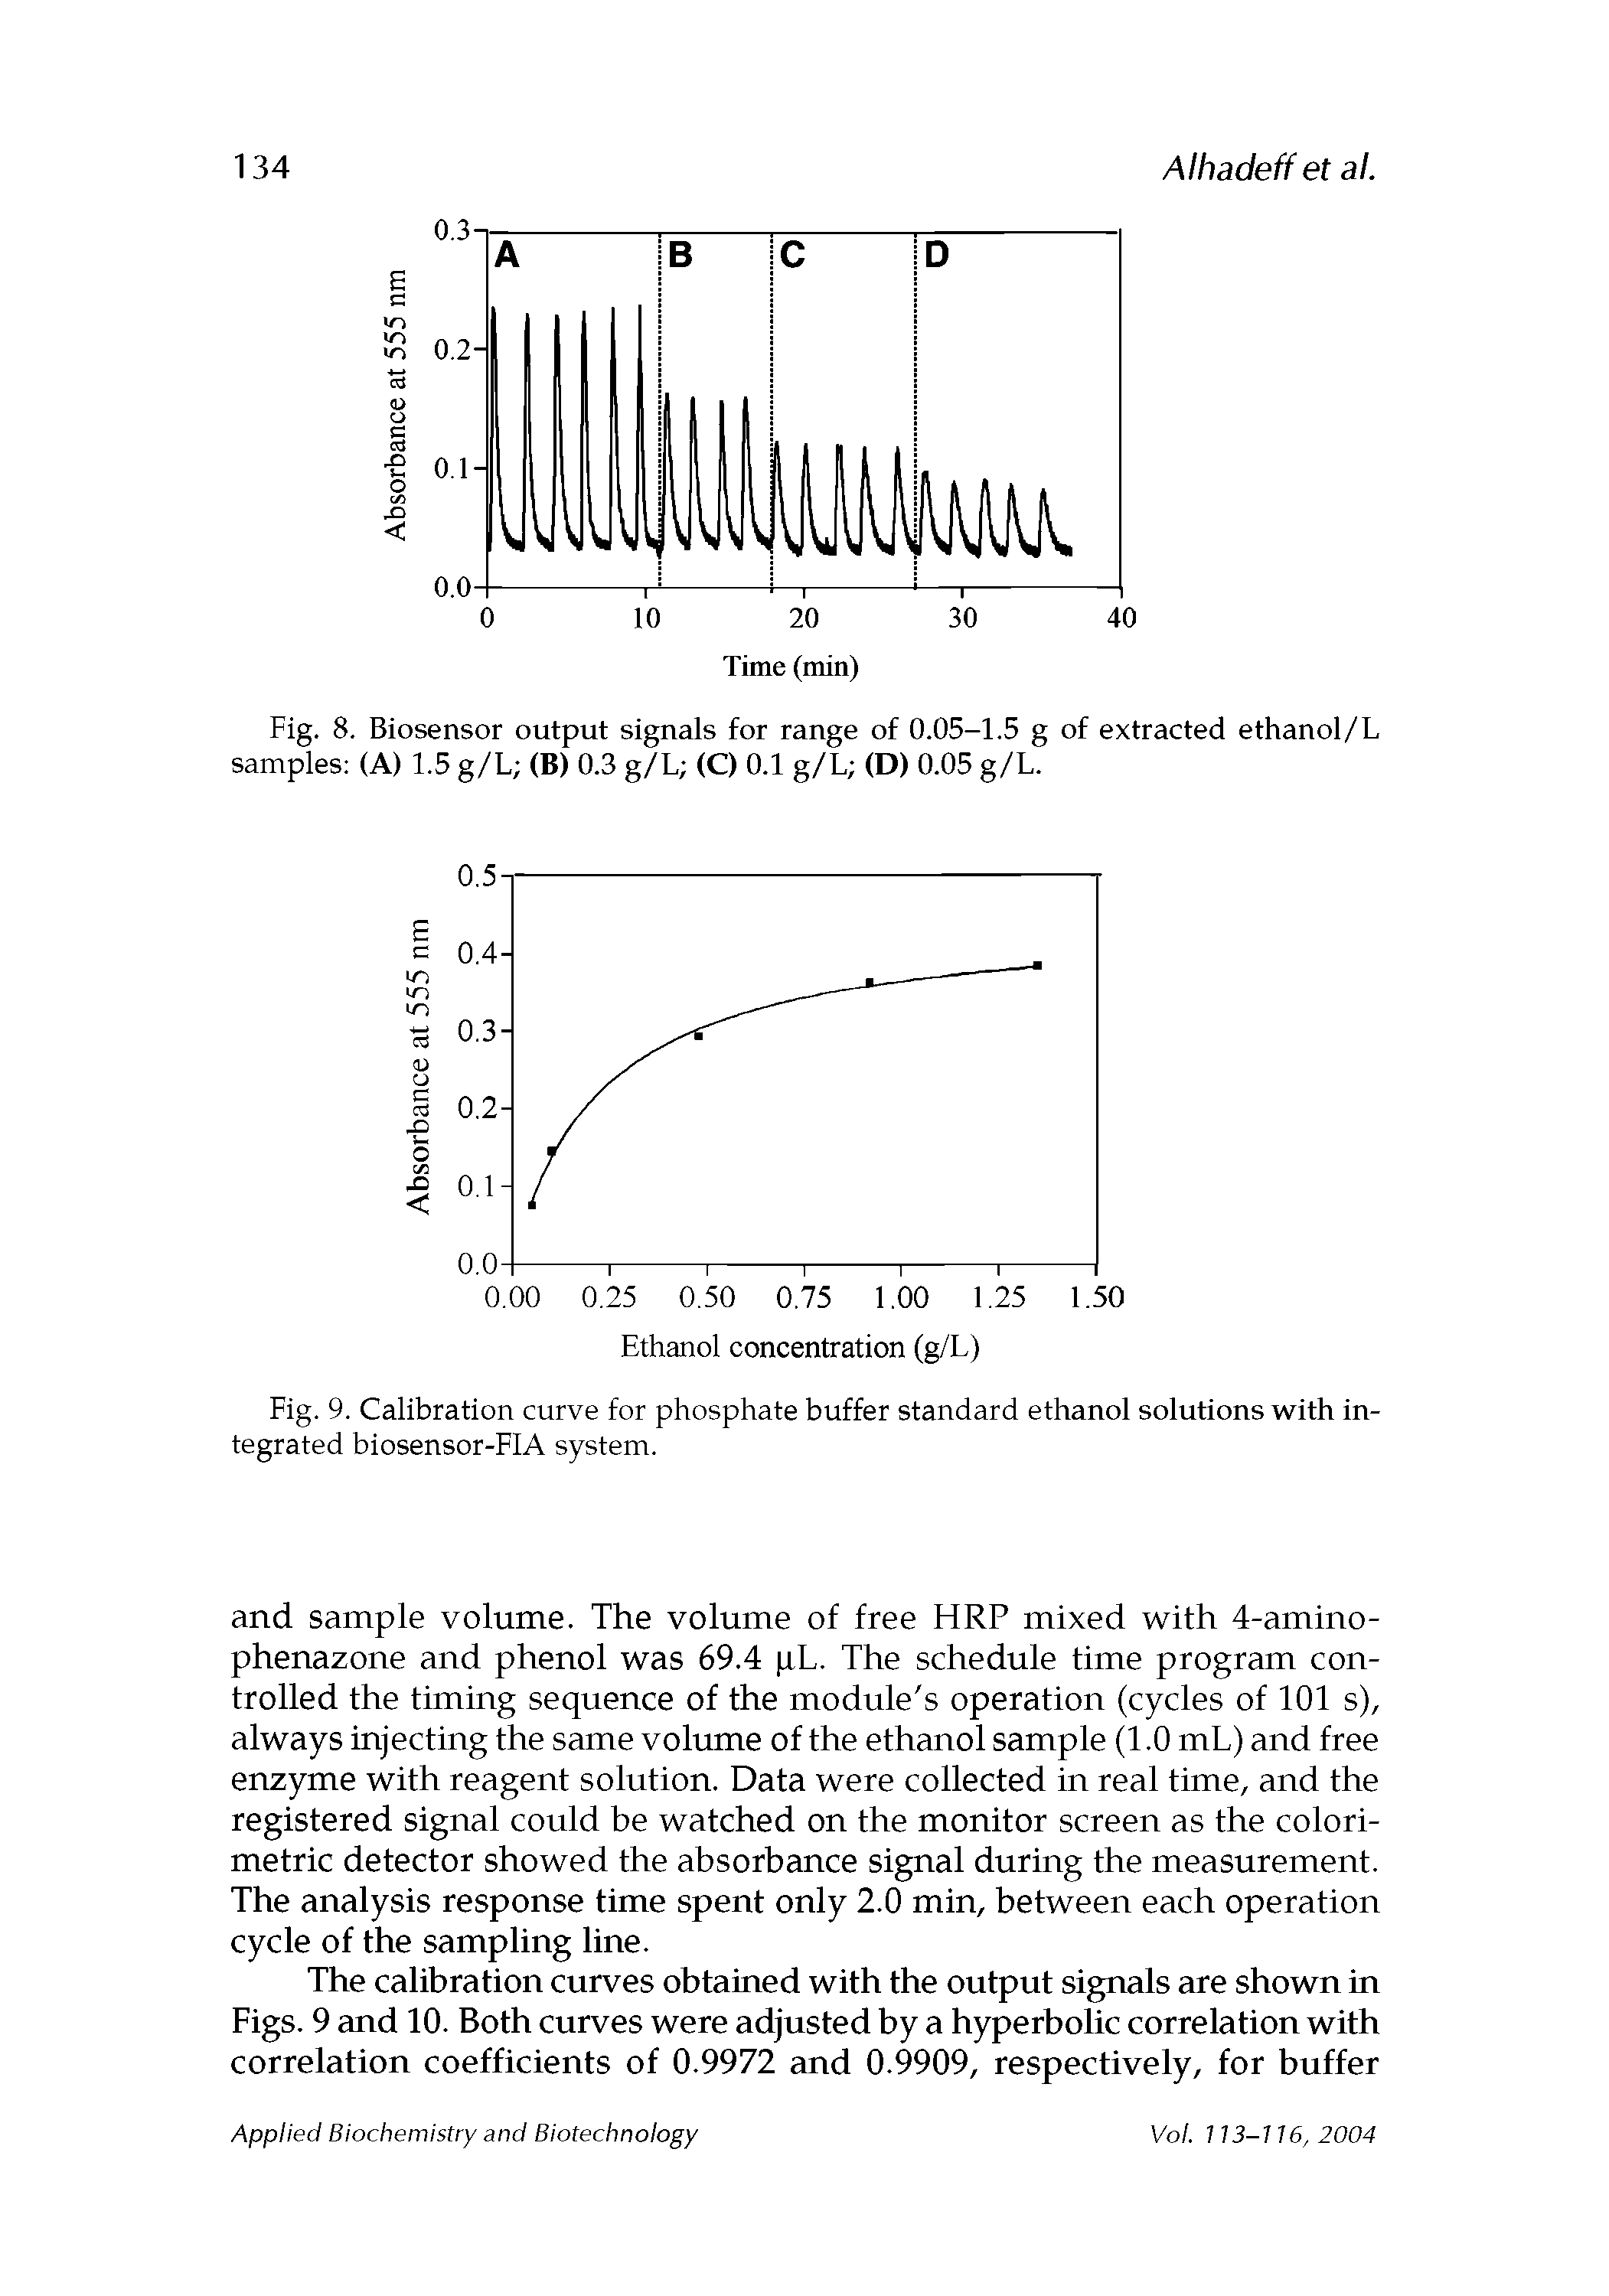 Fig. 9. Calibration curve for phosphate buffer standard ethanol solutions with integrated biosensor-FIA system.